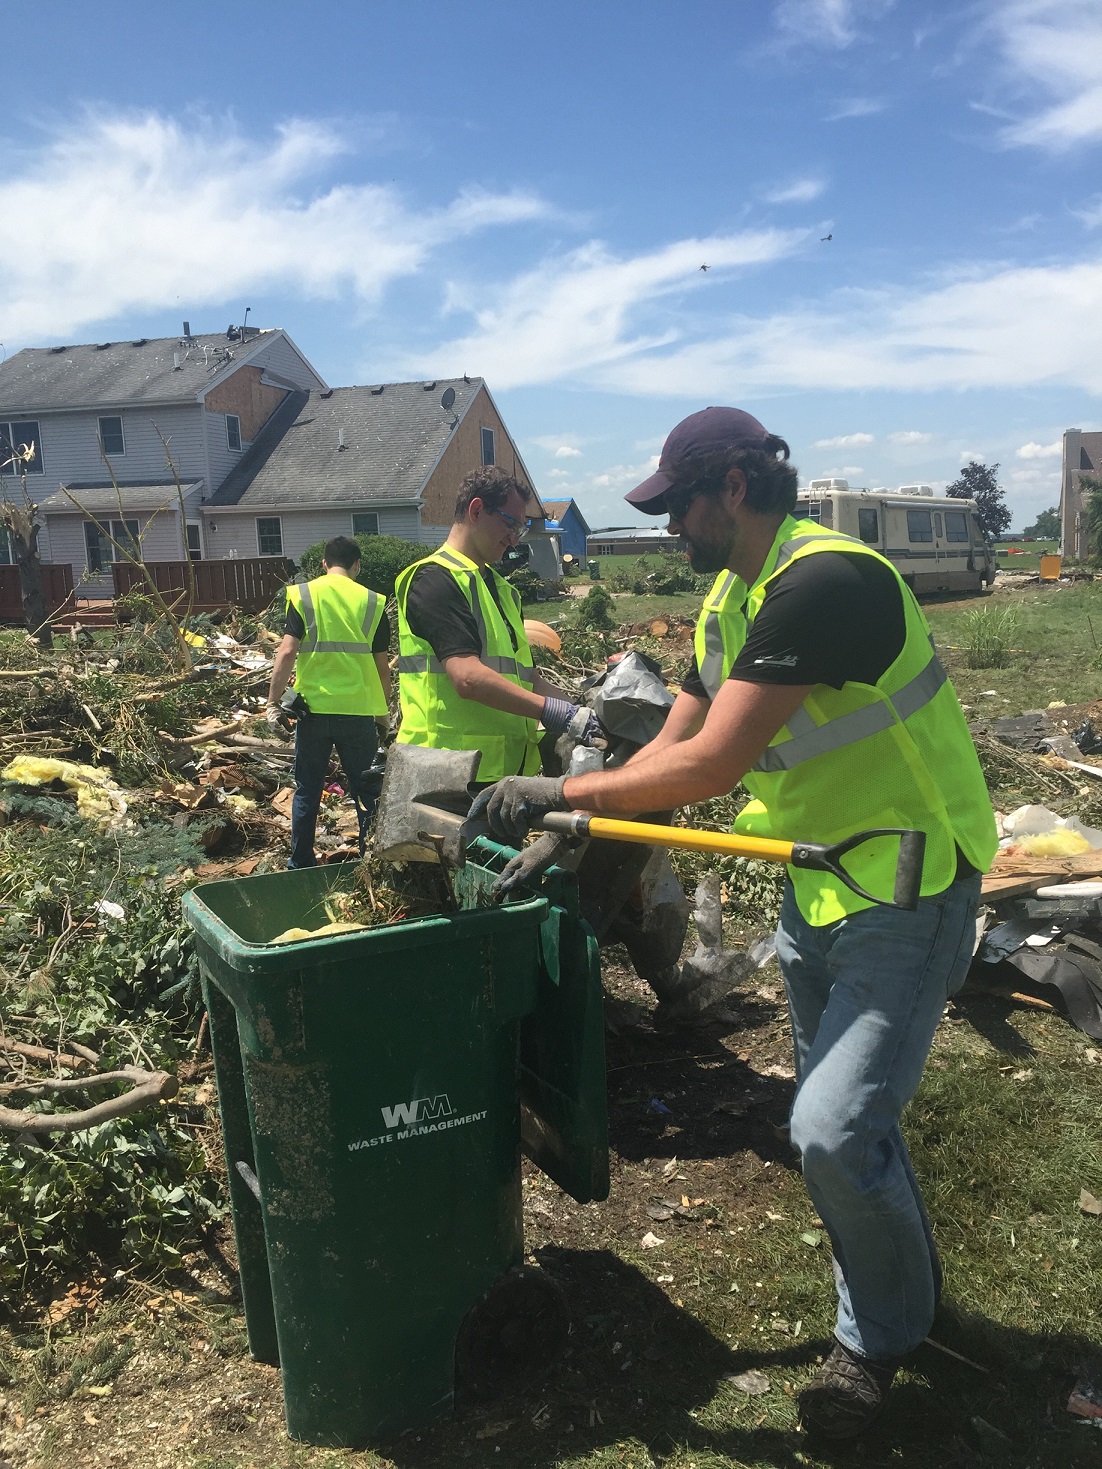 Clearing debris from residents' yards